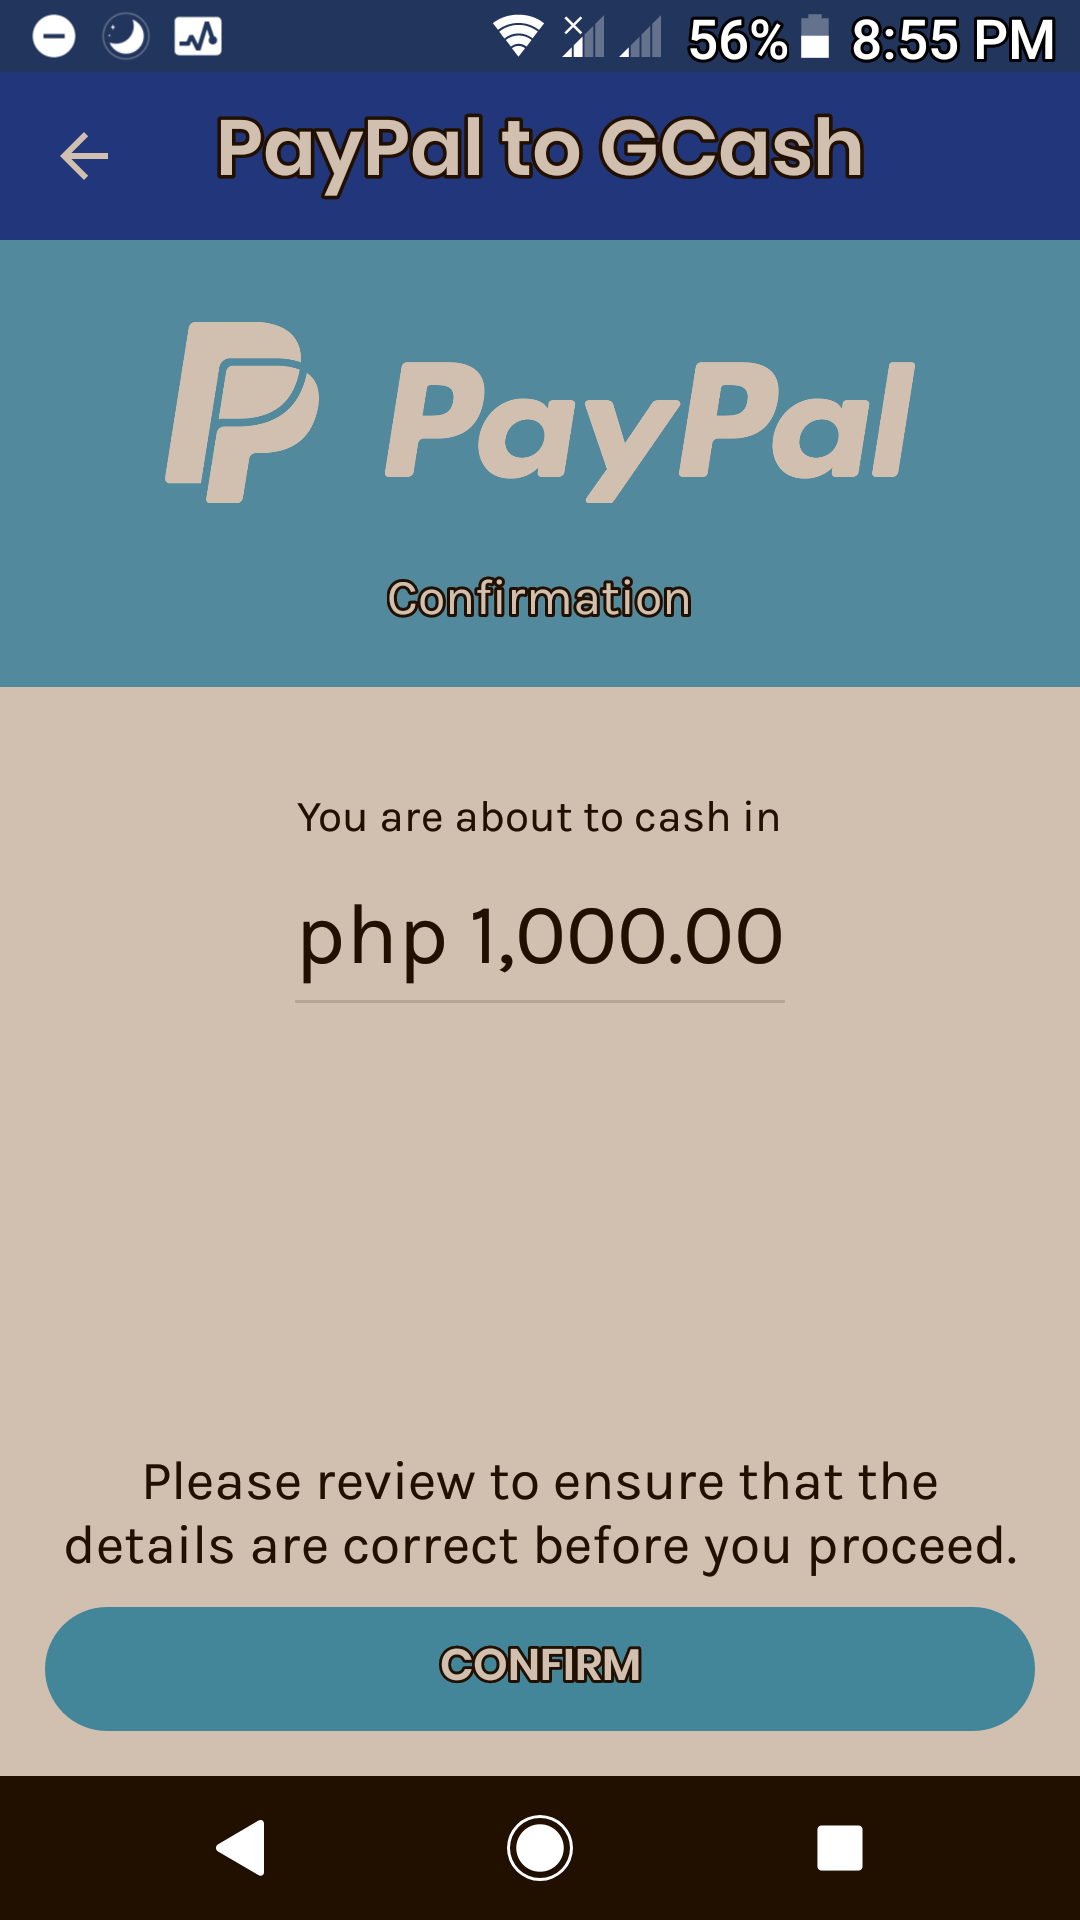 Paypal to Uphold transfer